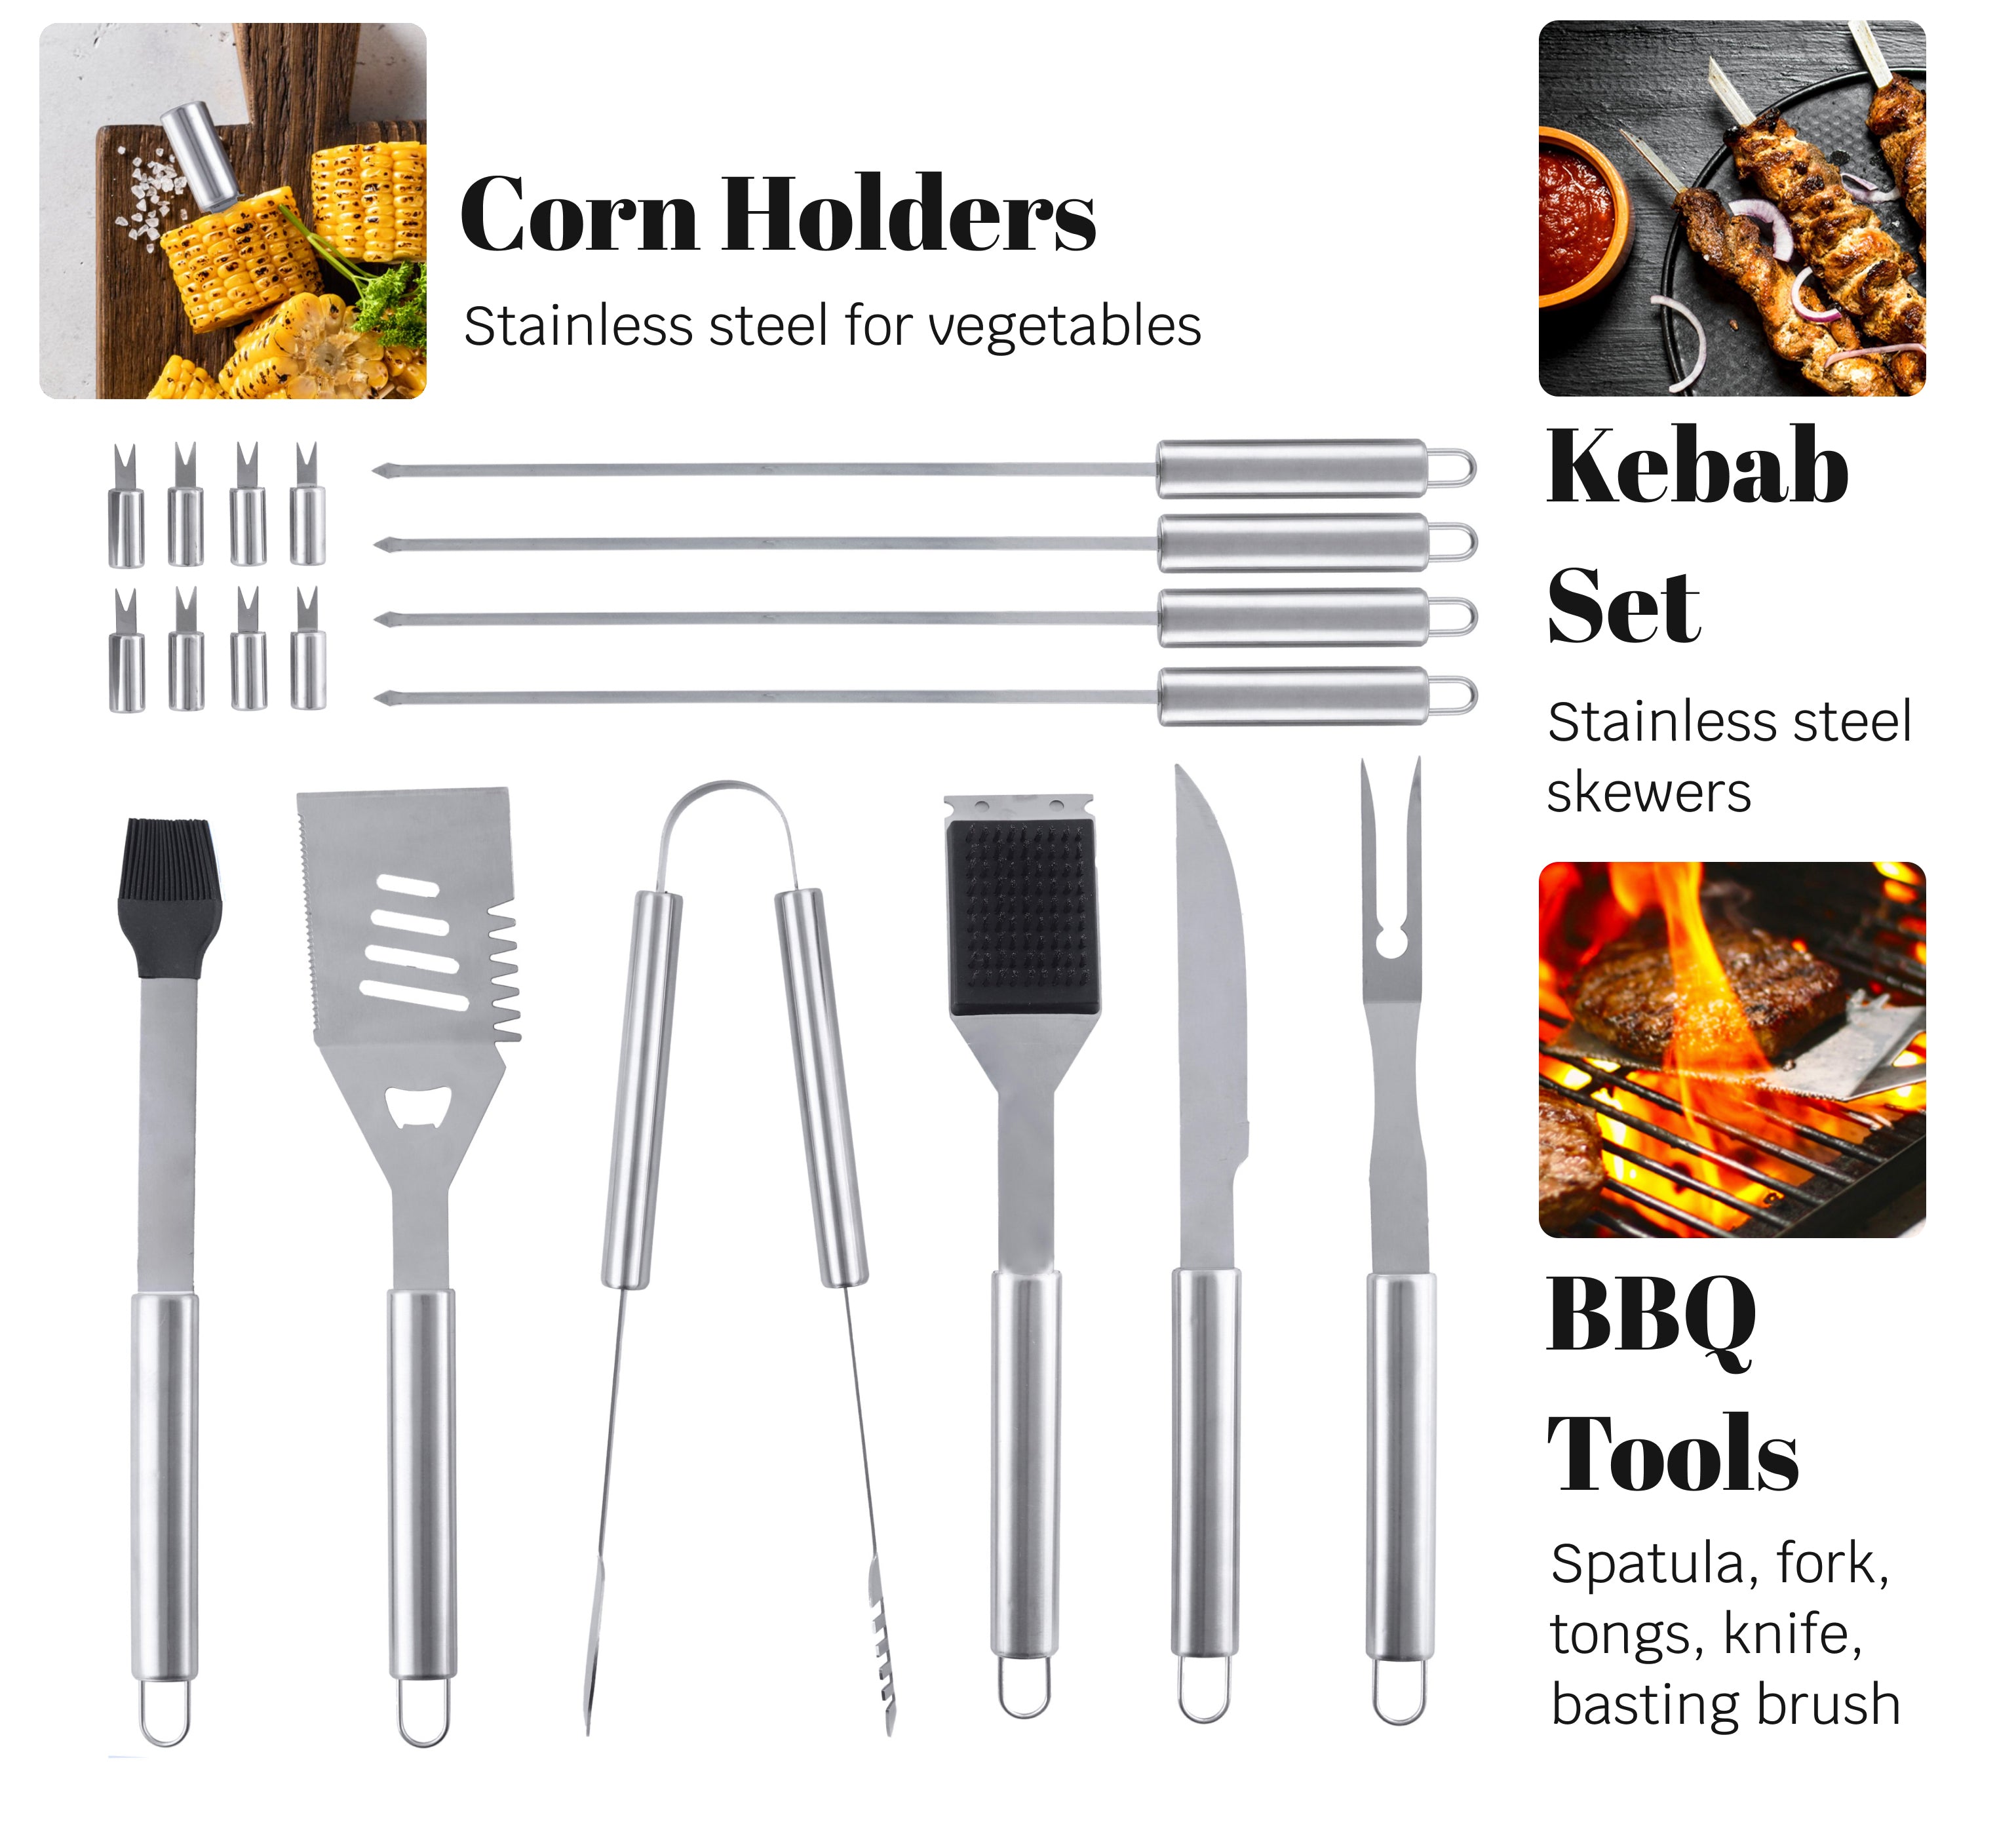 Grill Accessories for Outdoor Grilling - Outdoor Grill Accessories for Barbeque "Denver" - Premium Grill Tool Sets Grilling Utensils Set - Griddle Accessories Kit - BBQ Gear